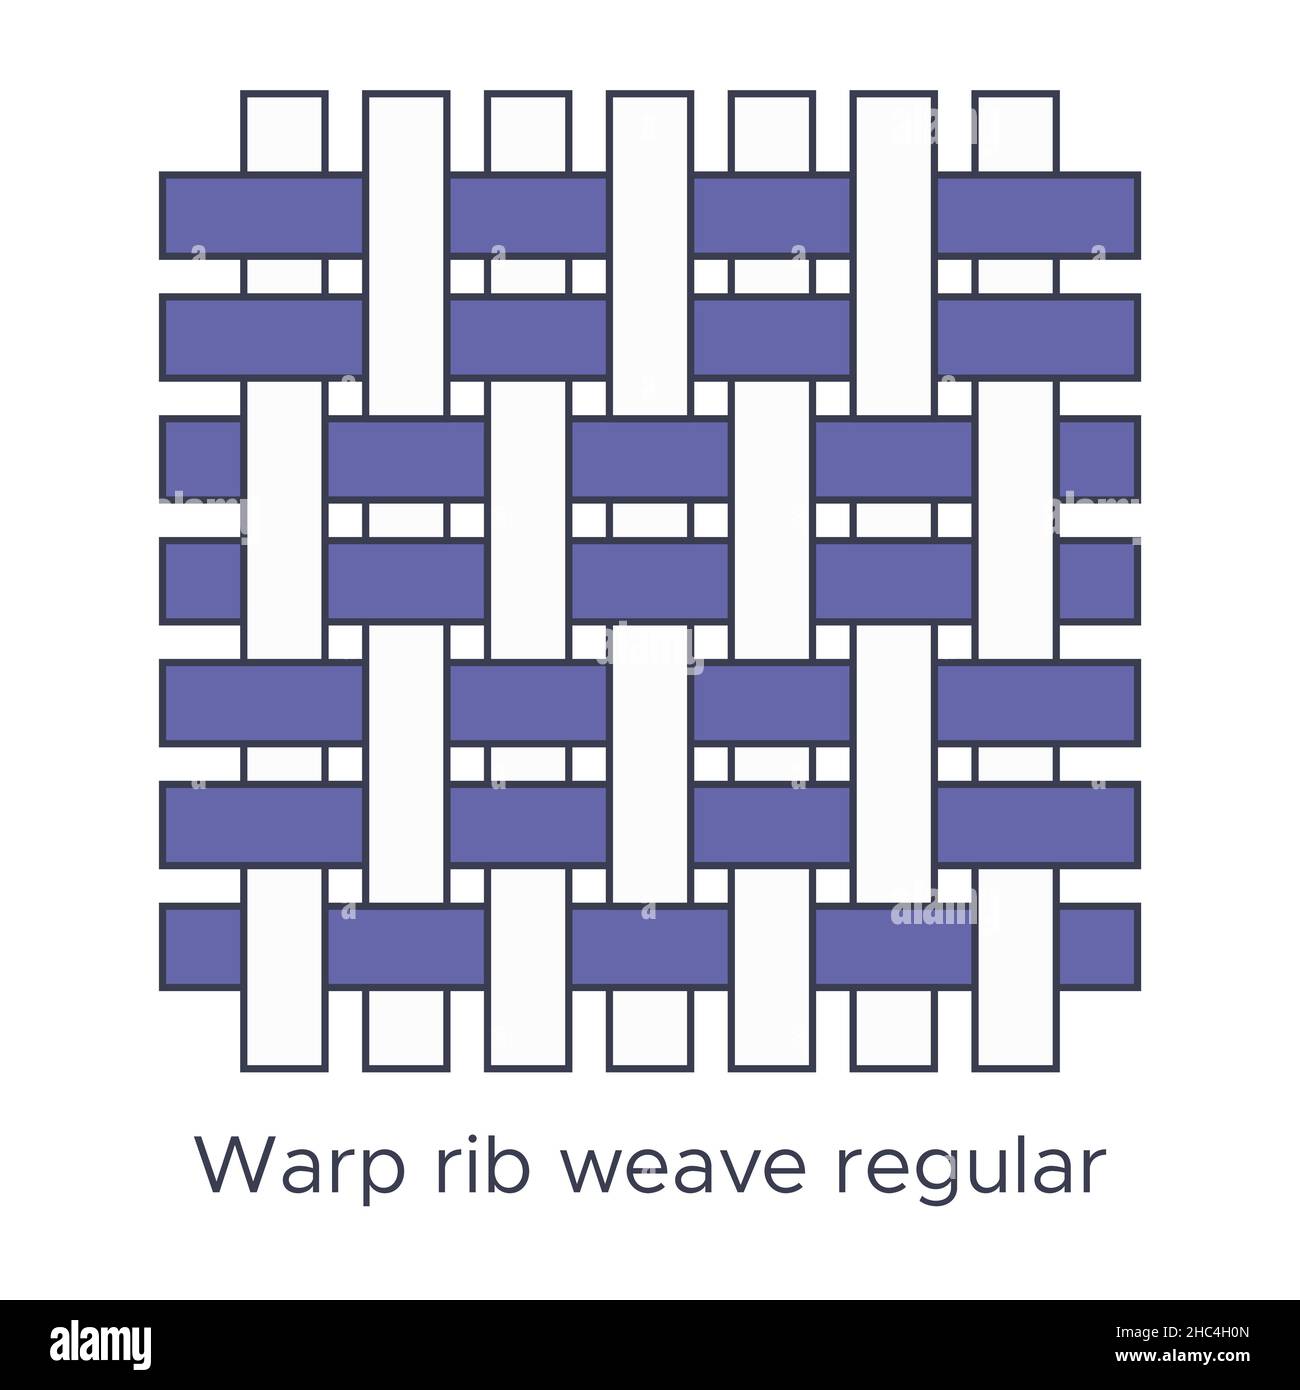 Fabric weft rib weave regular type sample. Weave samples for textile education. Collection with pictogram line fabric swatch. Vector illustration in f Stock Vector